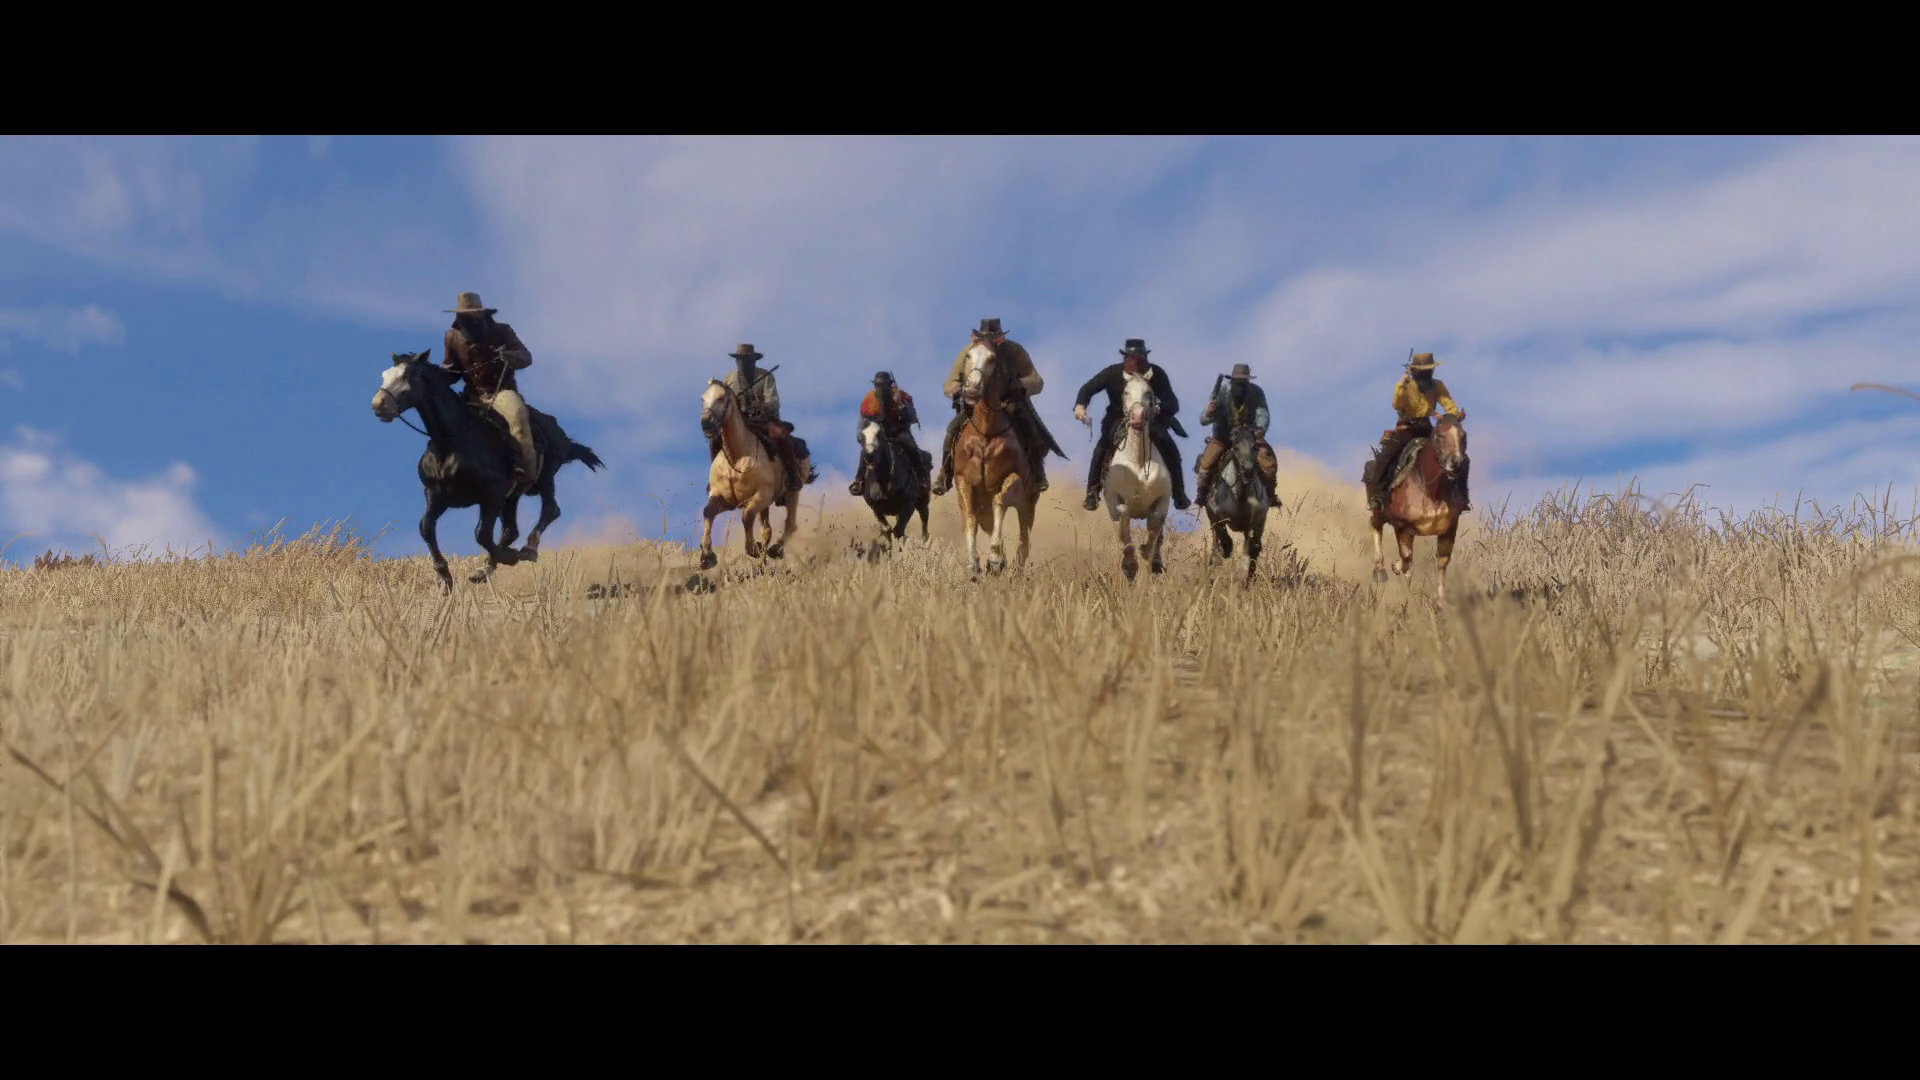 http://www.rdrvision.com/images/content/red-dead-redemption-2/trailer_1/red-dead-redemption-2_trailer-1_24.png